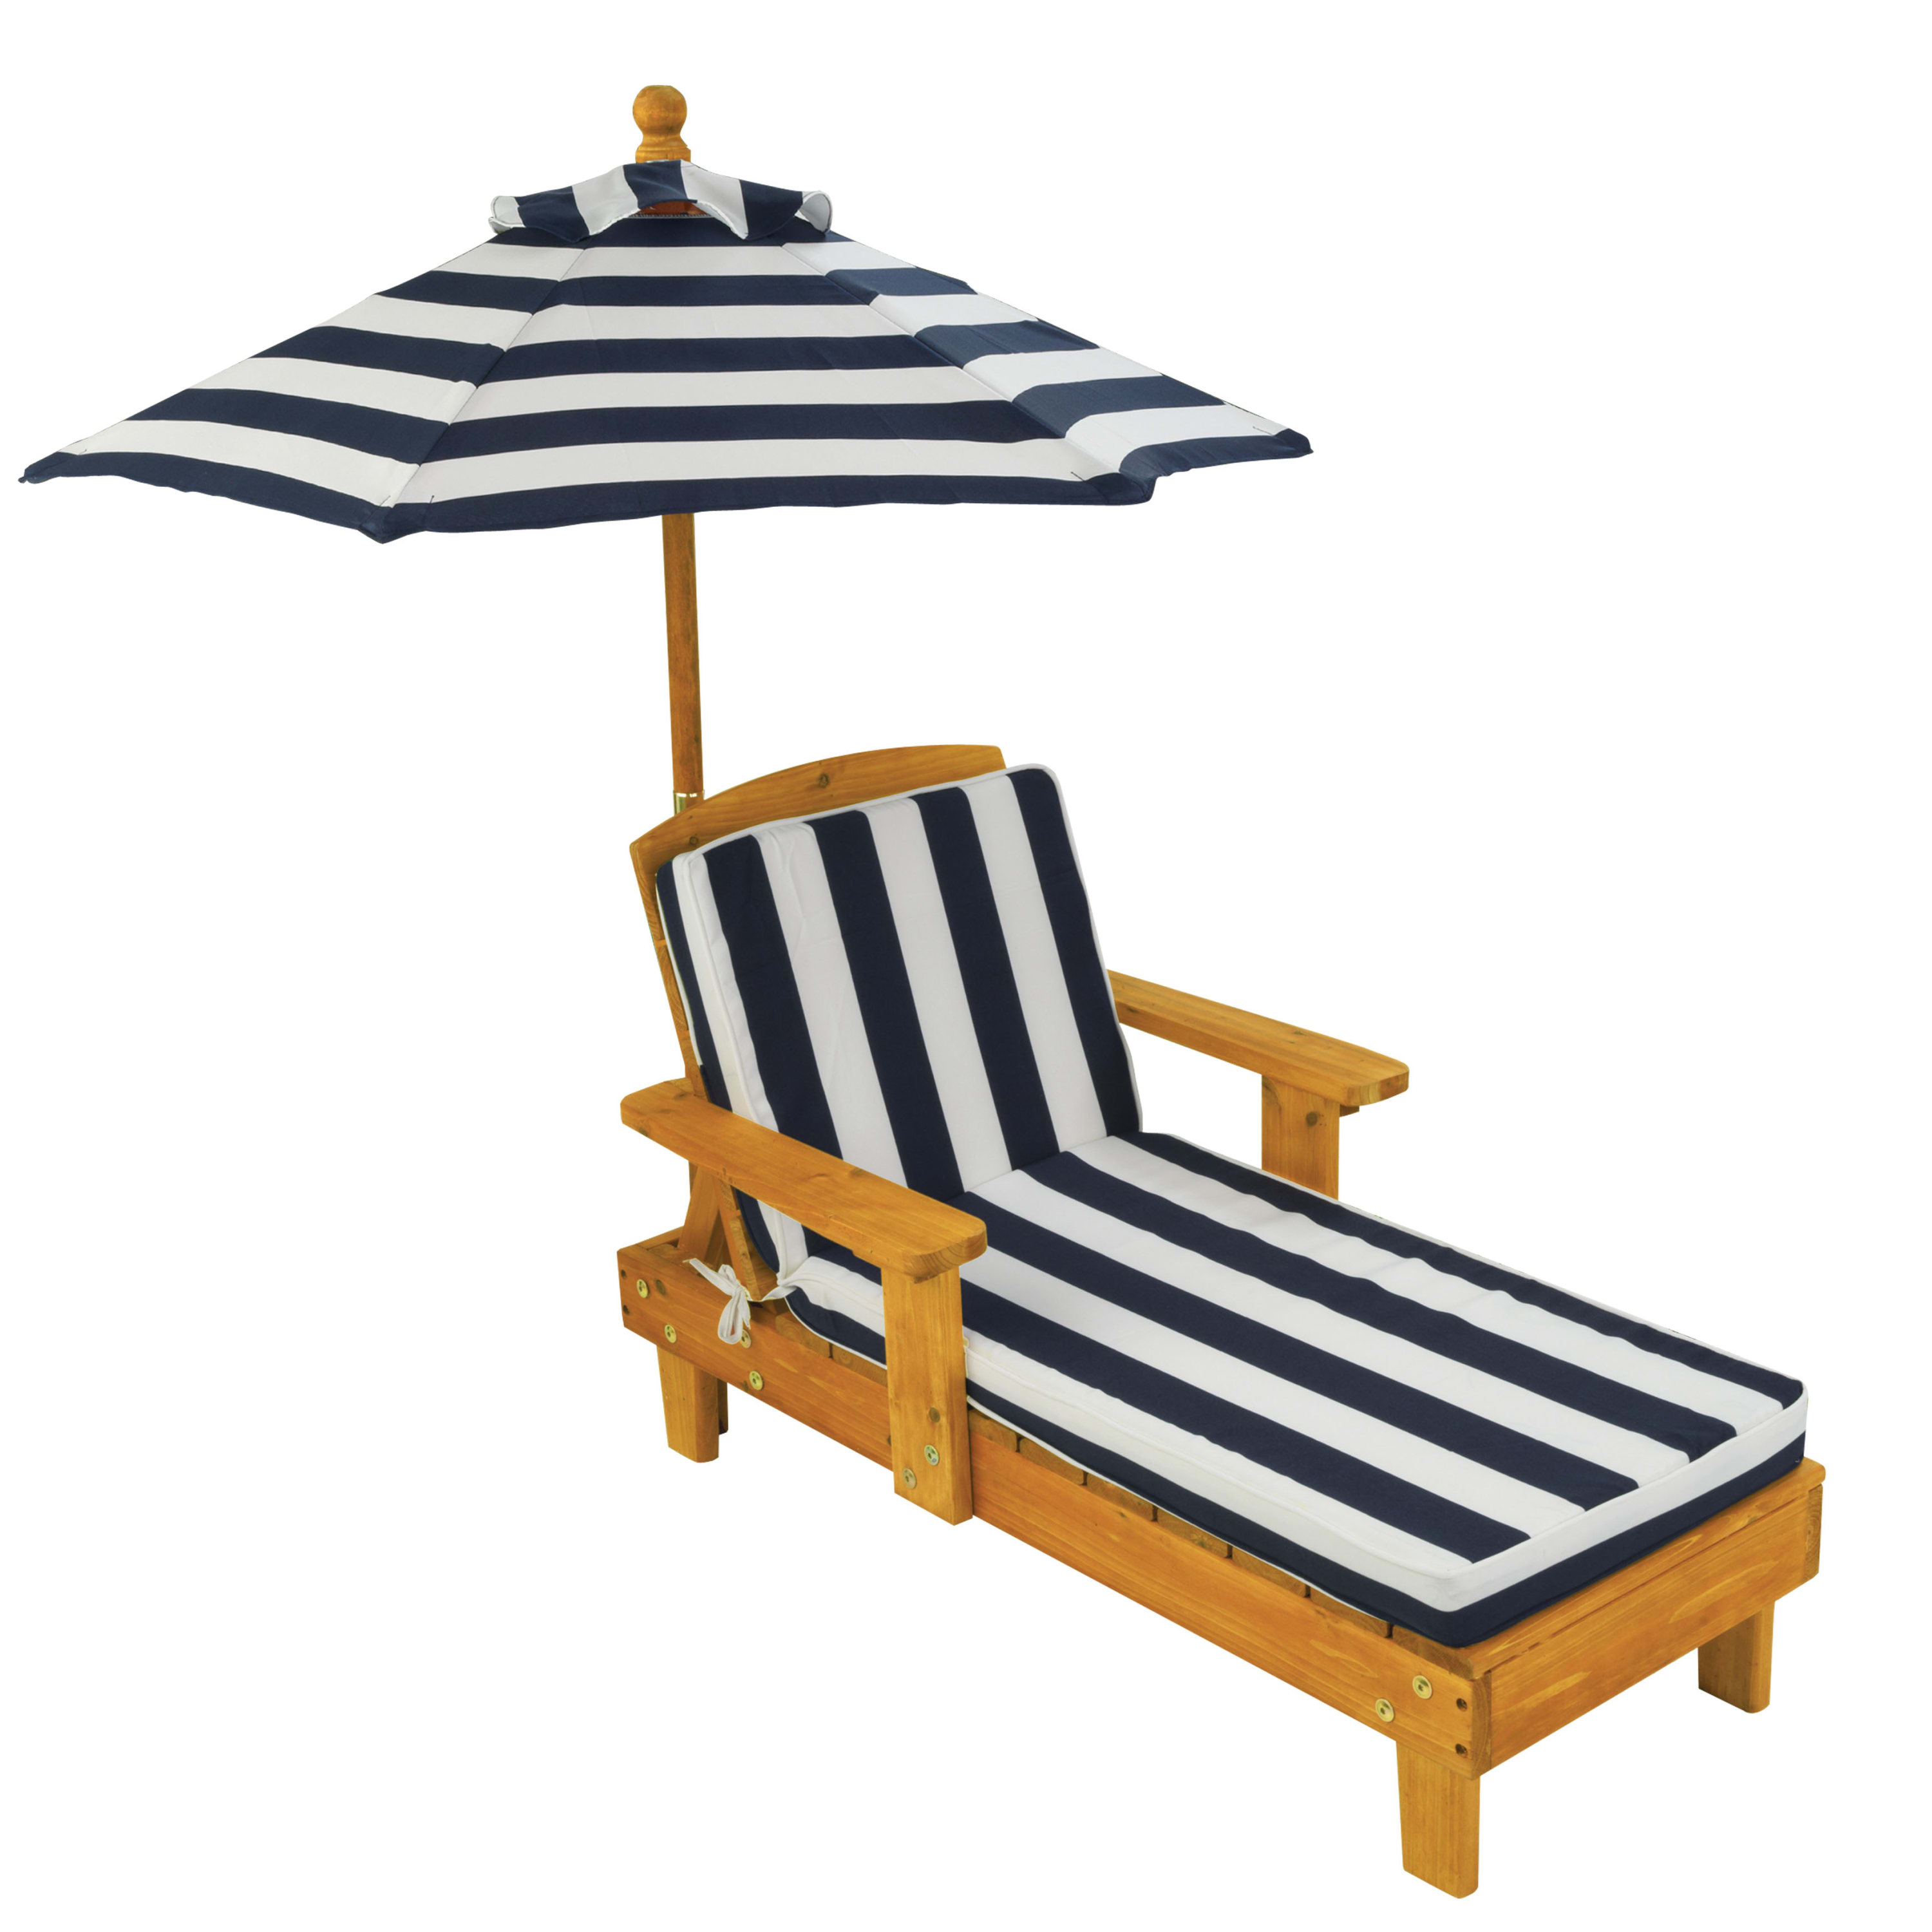 KidKraft Outdoor Wood Chaise Kid's Chair with Umbrella and Cushion - image 1 of 11